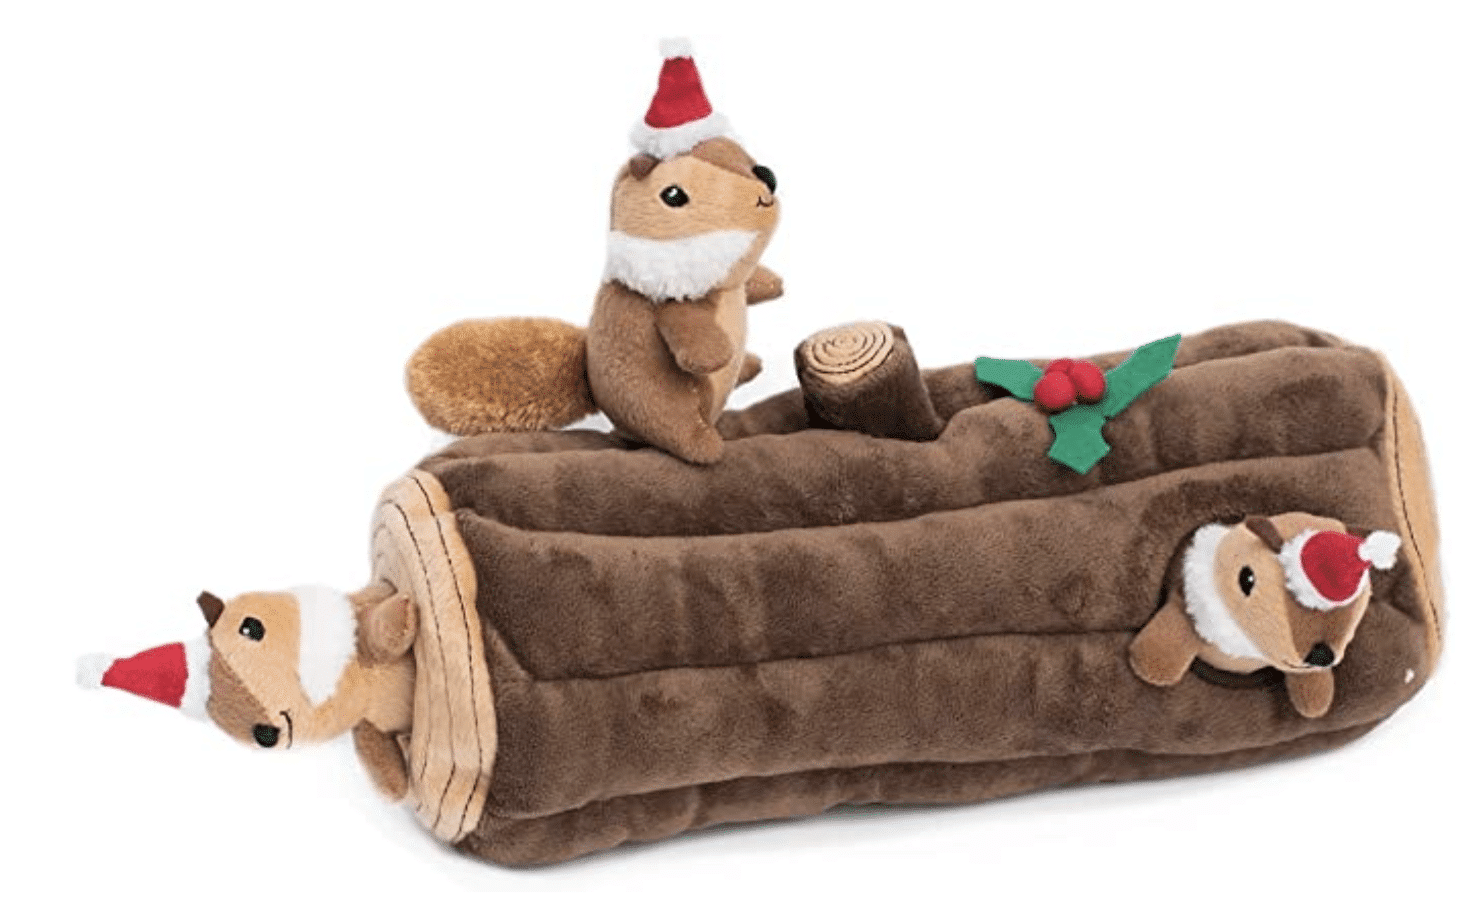 Christmas squirrel hide and seek toy for dogs